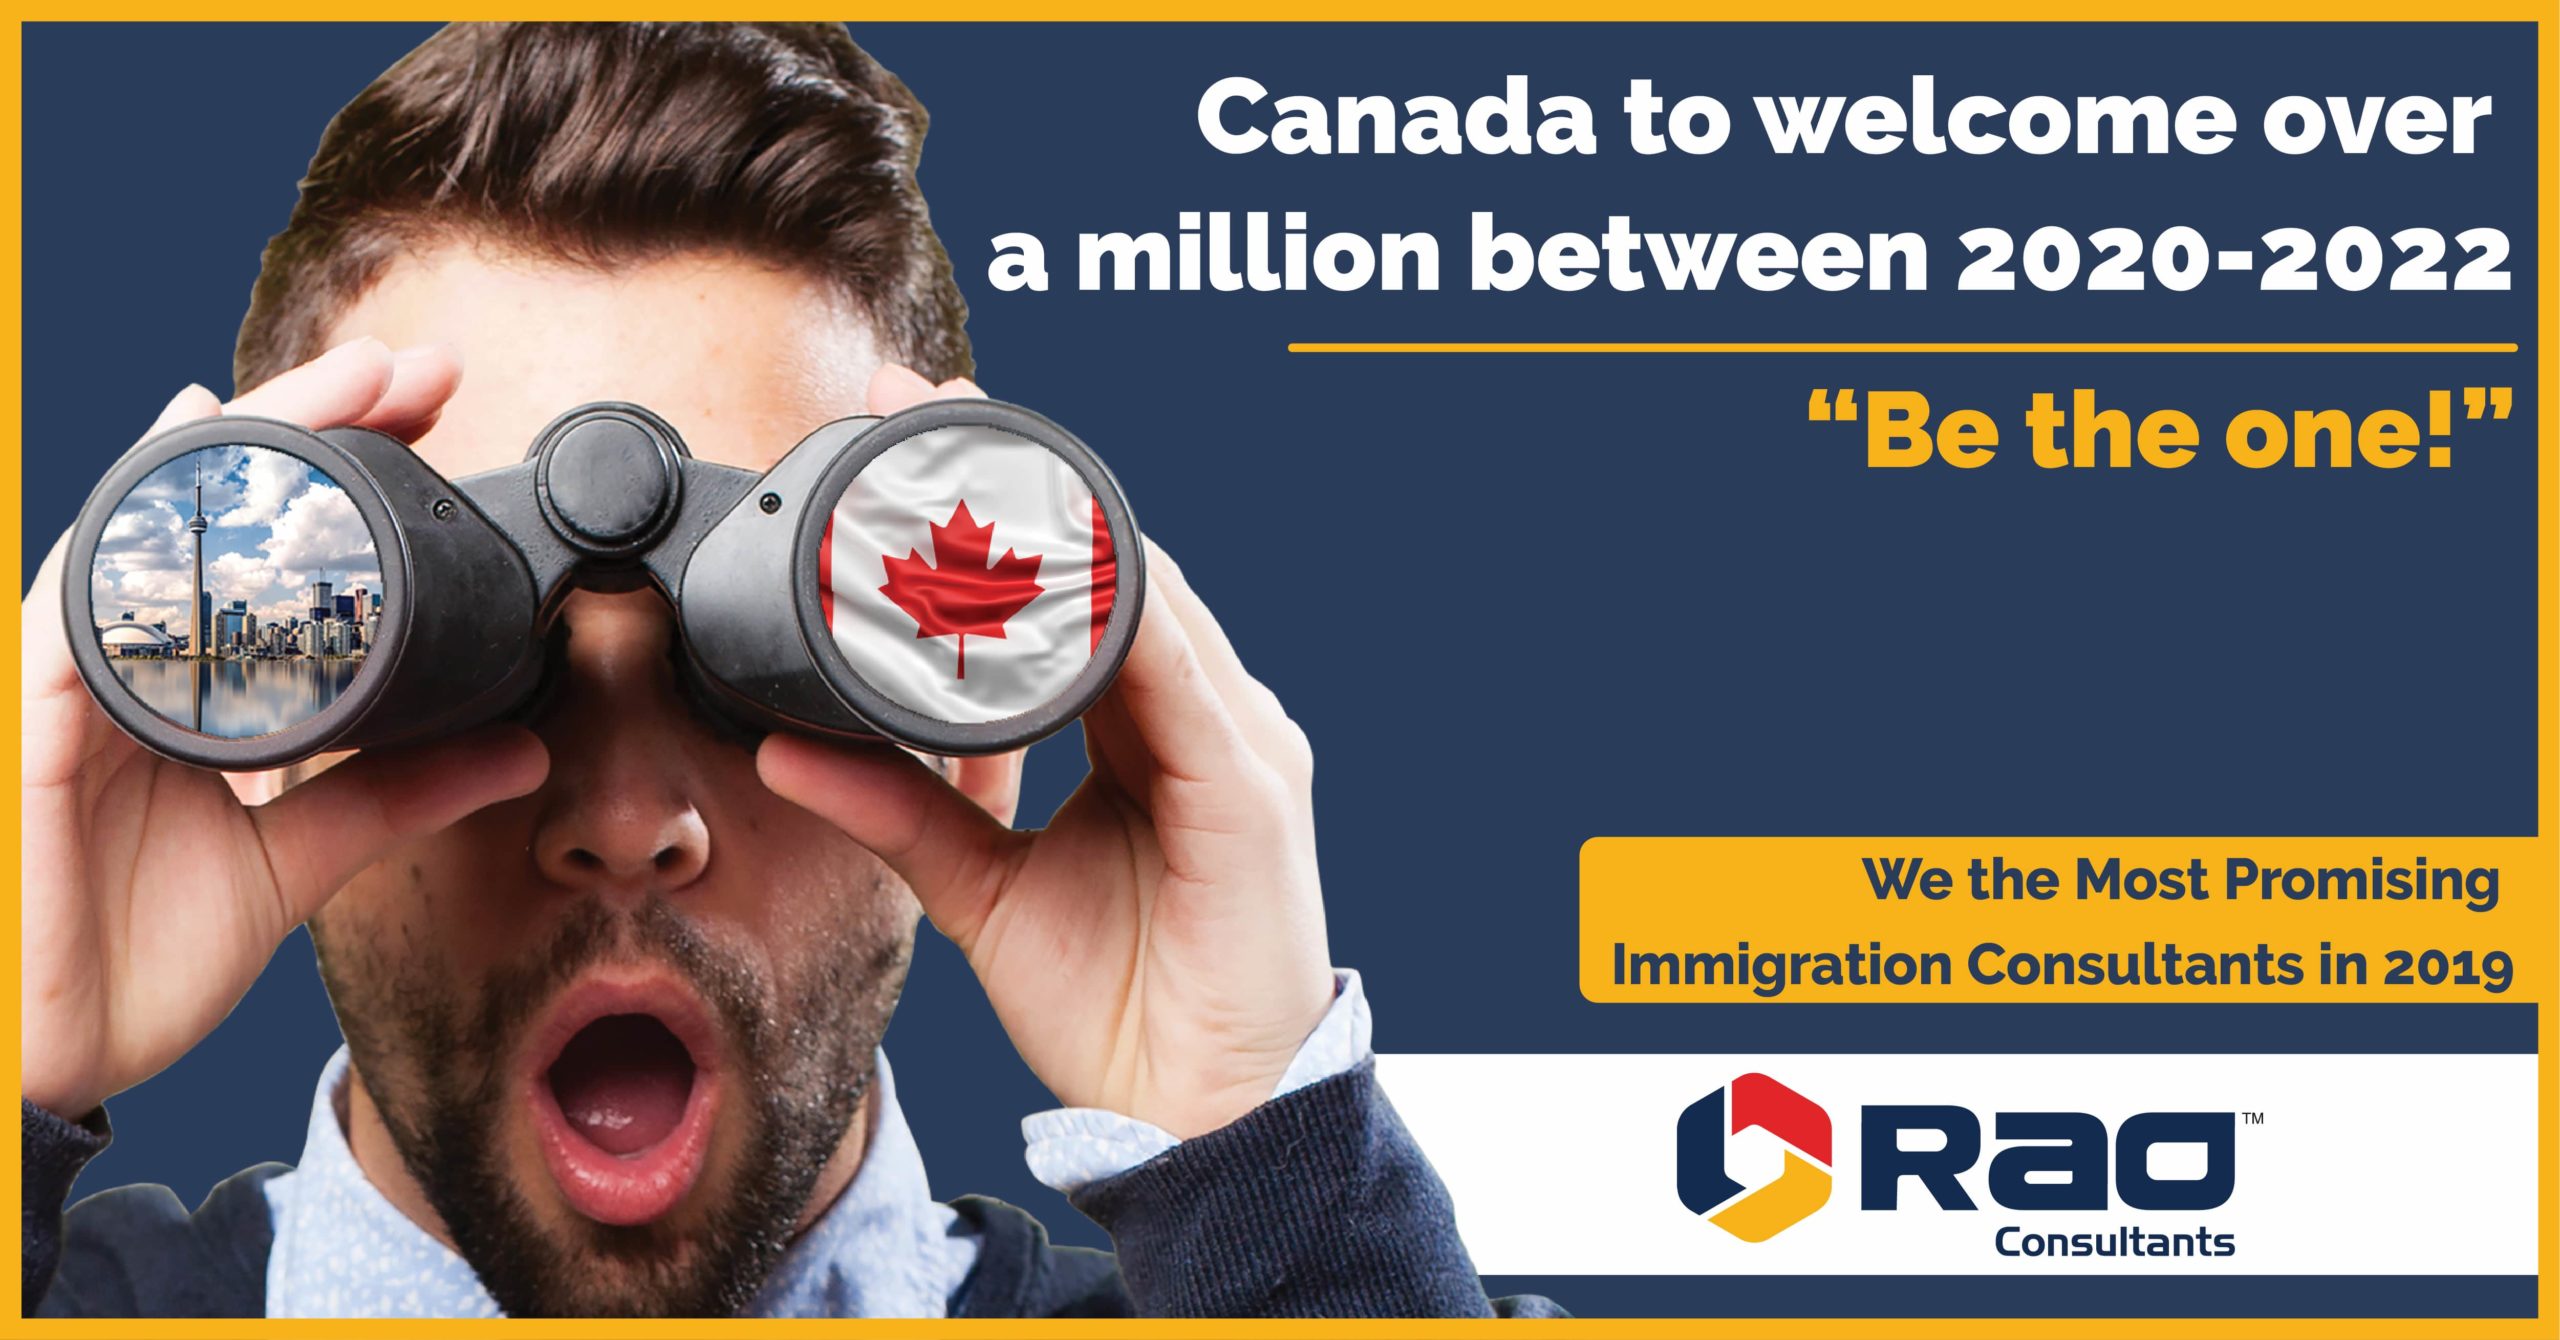 Canada to Welcome Over a Million Between 2020-2022- Be The One!